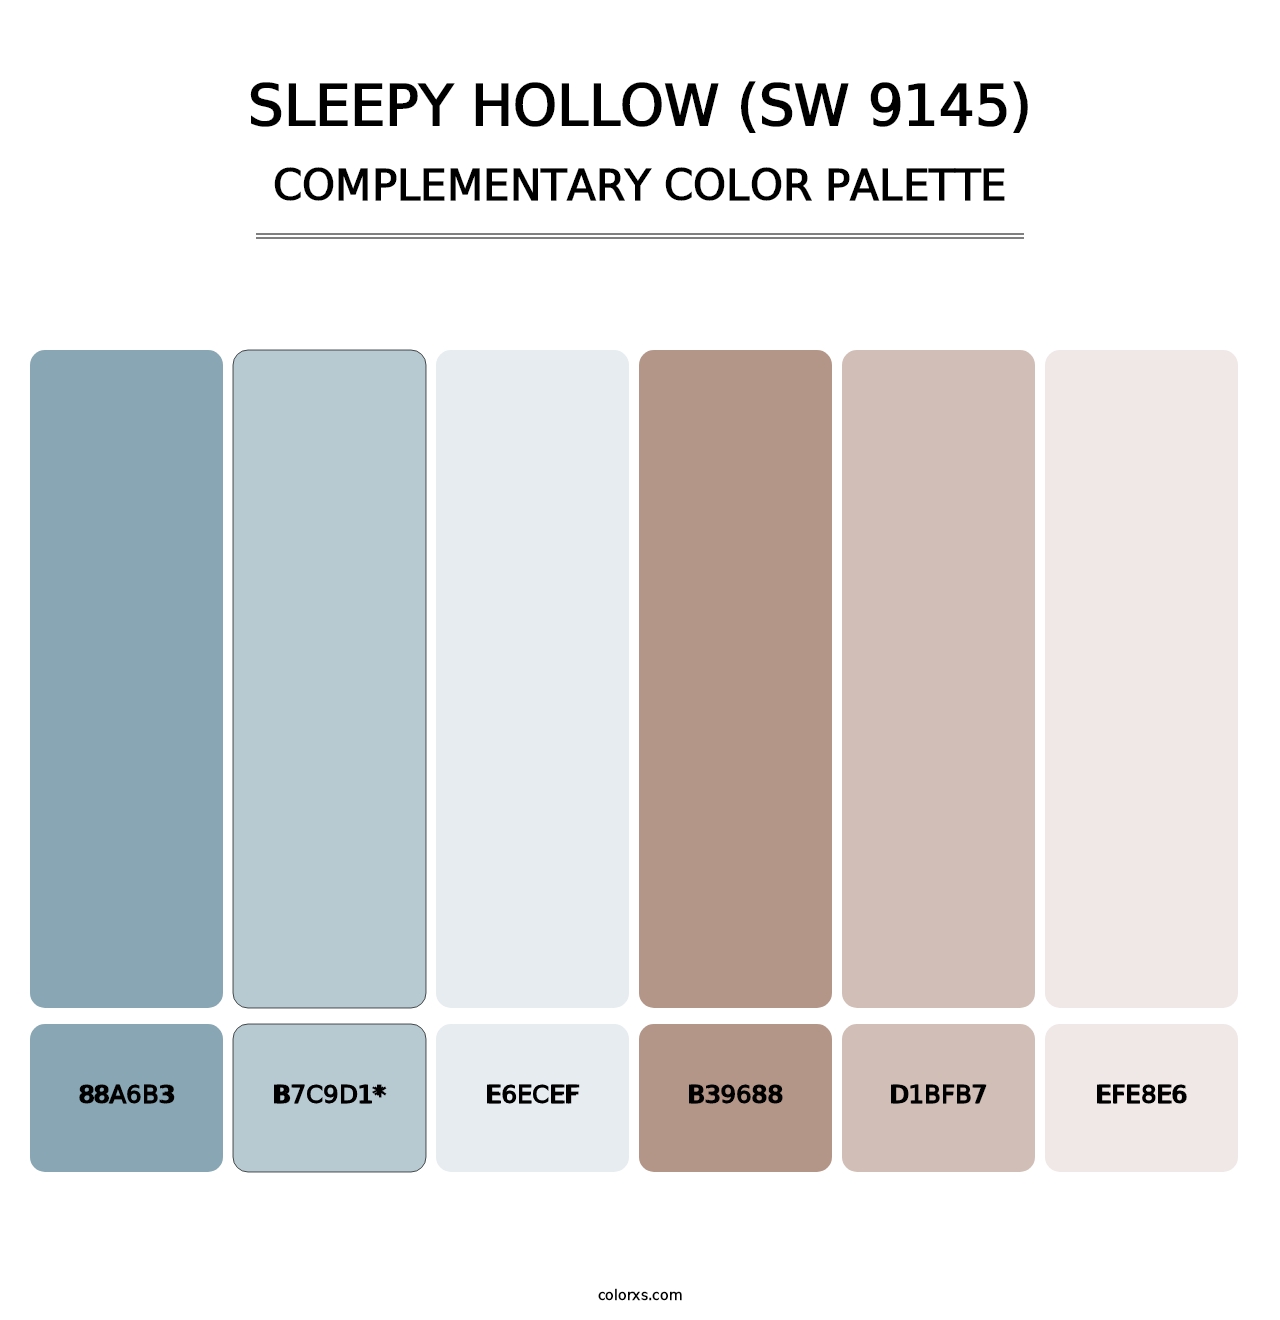 Sleepy Hollow (SW 9145) - Complementary Color Palette